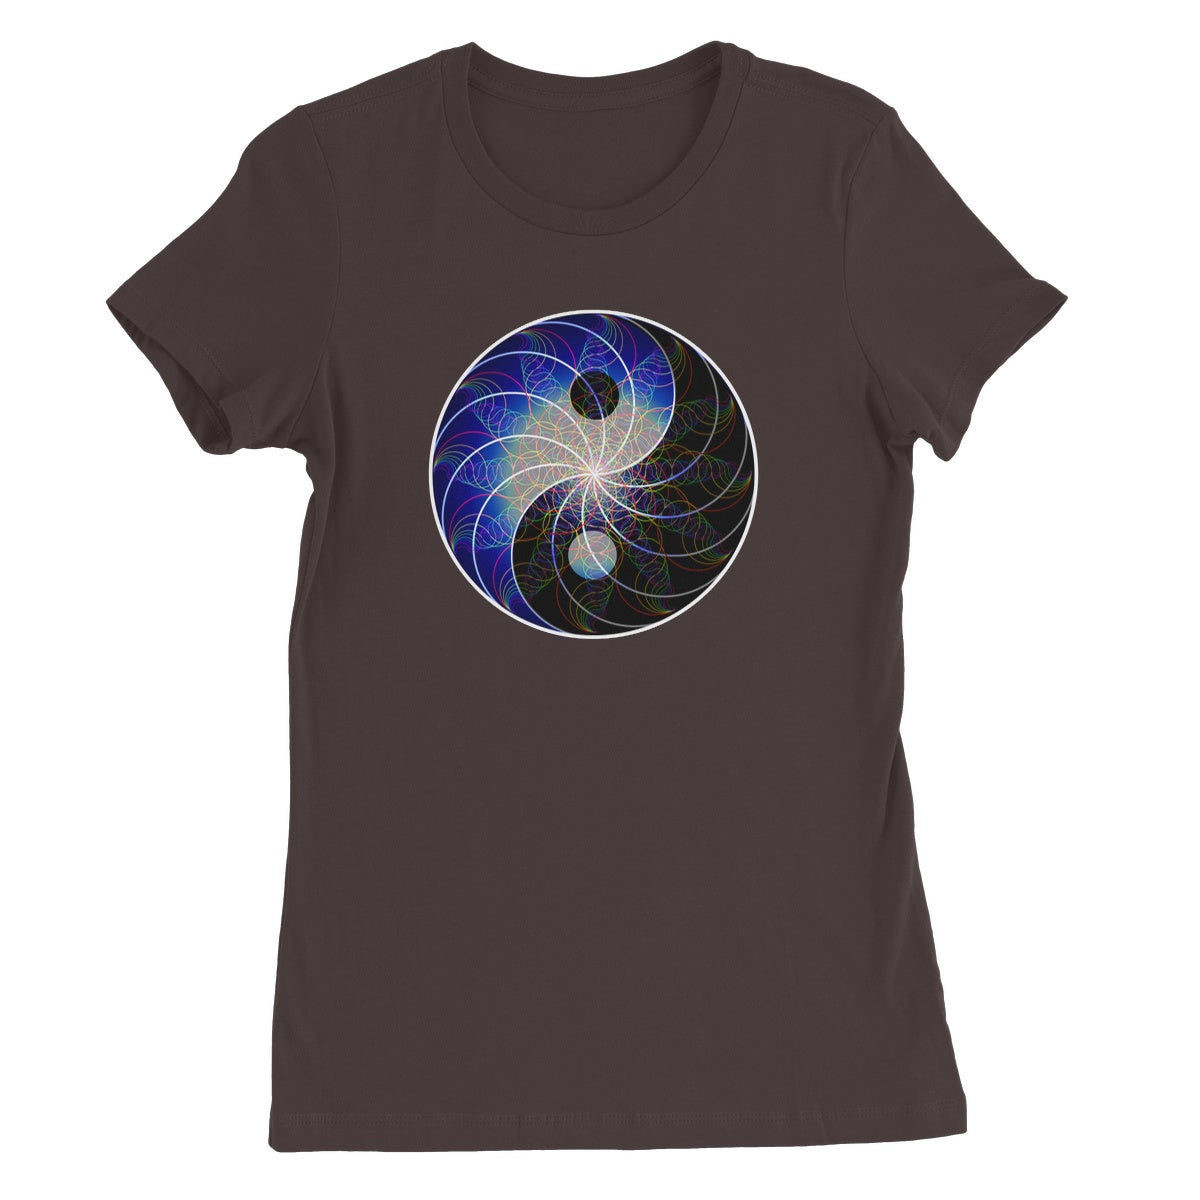 In Darkness there is Light Women's Favourite T-Shirt